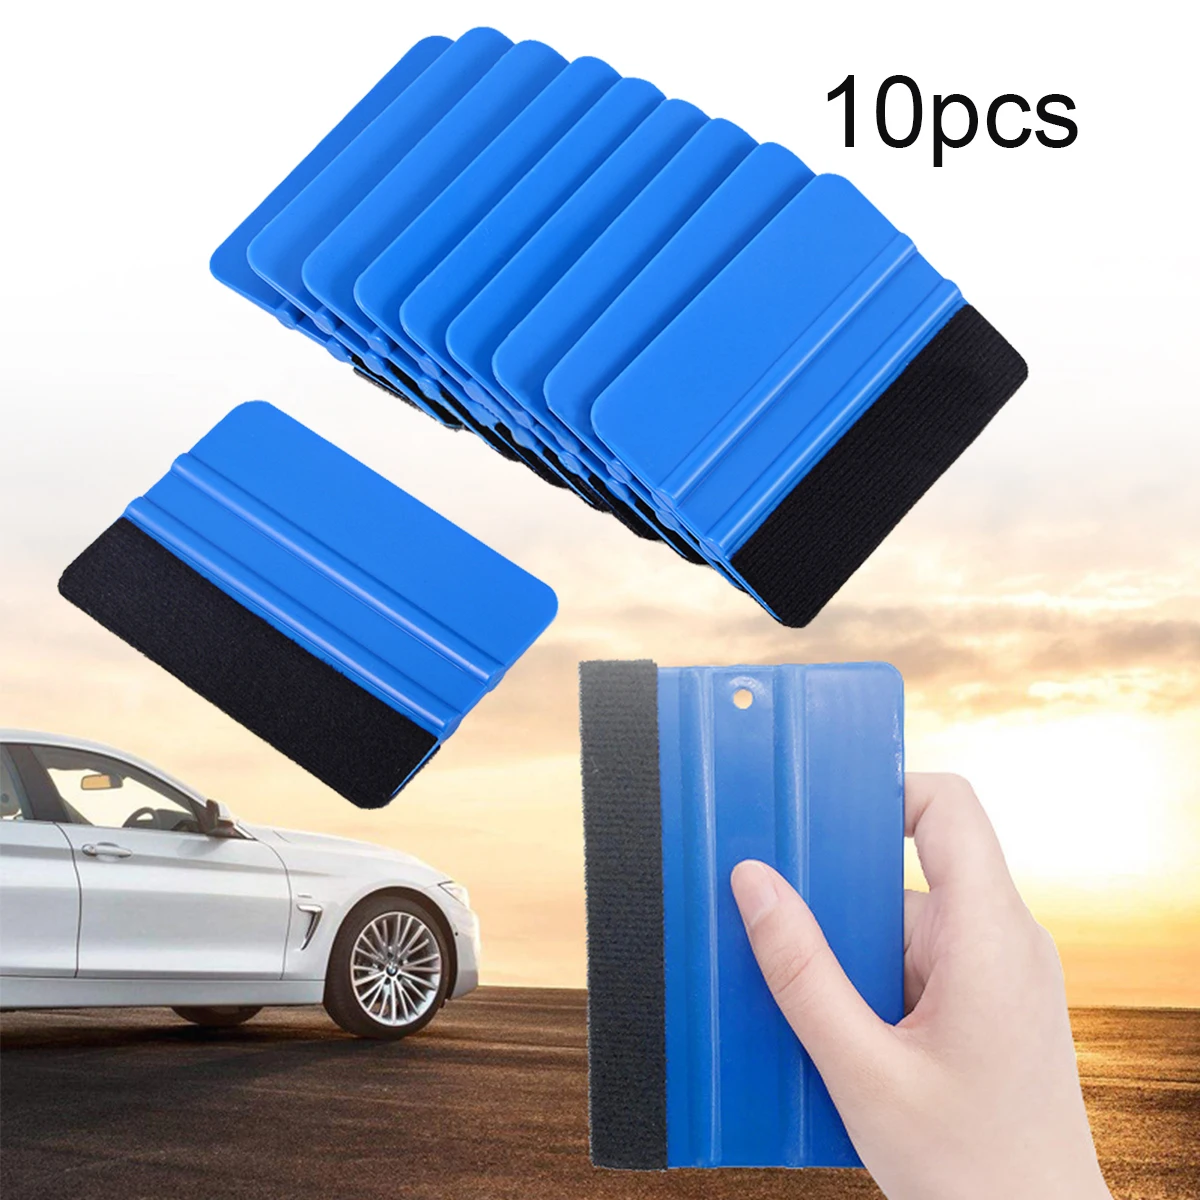 10pcs Car Film Tool Squeegee Soft Advertising Glass Wallpaper Soft Double Sided Squeegee dice 6 sided 10pcs marbled effect dice brand new pearlized effect fate dice for fate